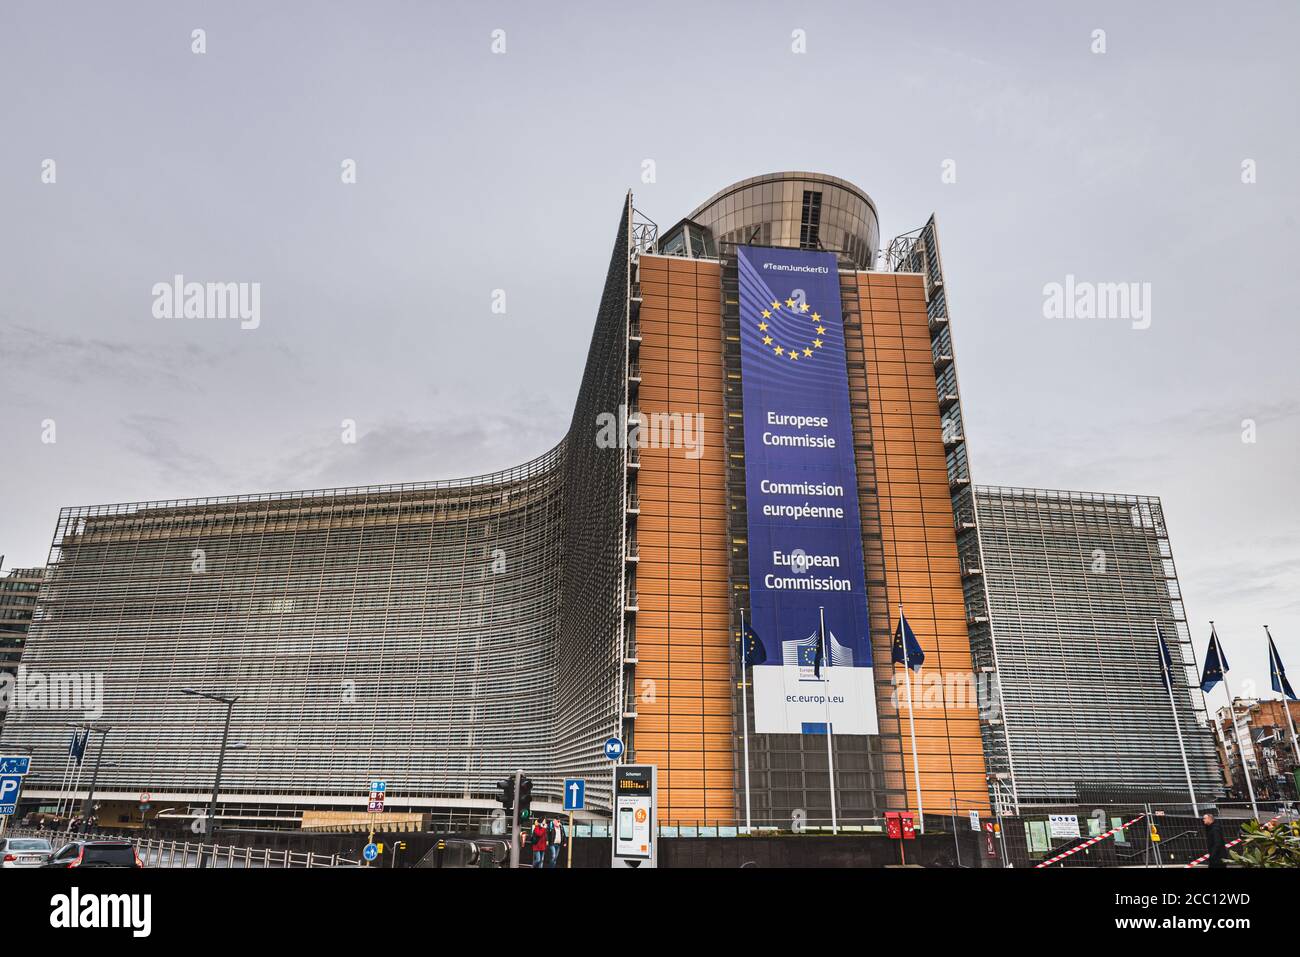 Le Berlaymont building houses the headquarter of the European Commission foreseen by Robert Schuman. European head office in Brussels, Belgium Stock Photo